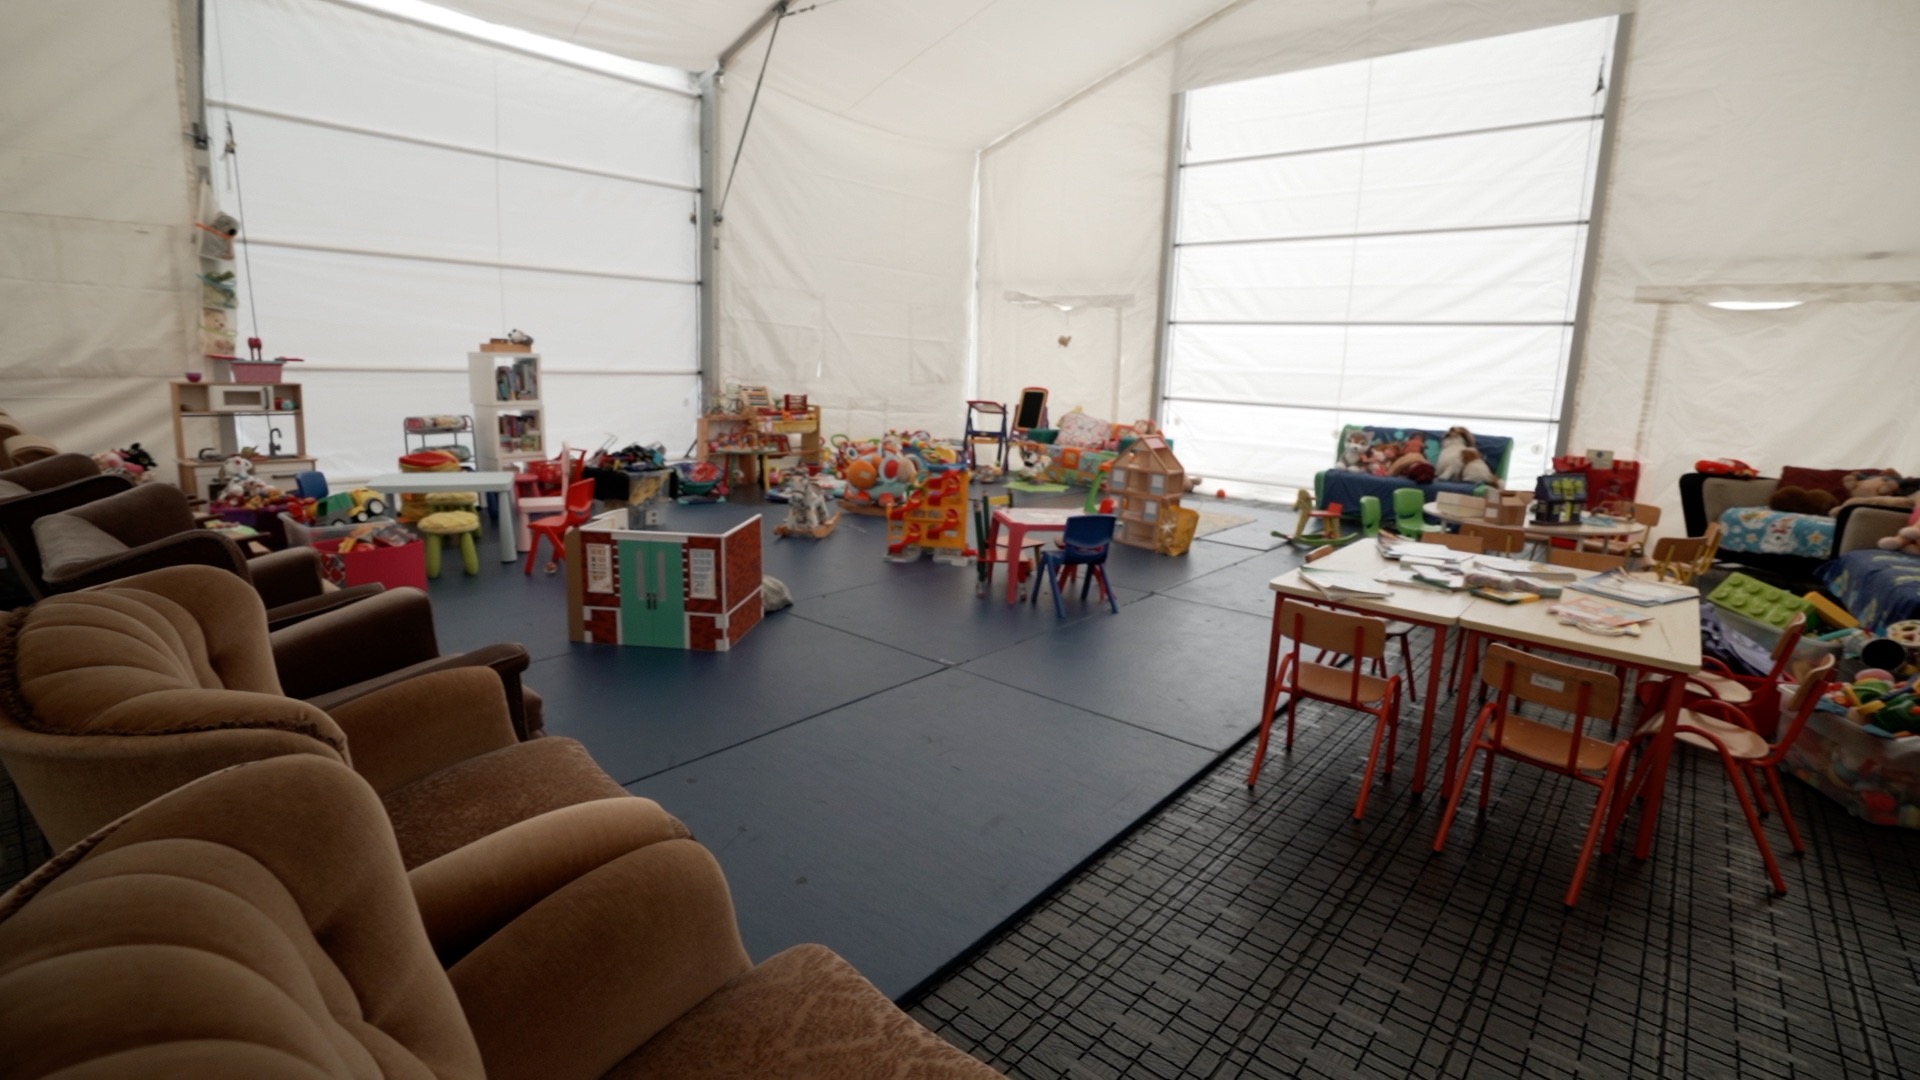 A child’s play area at Gormanston Army Camp. Image: Department of Taoiseach.